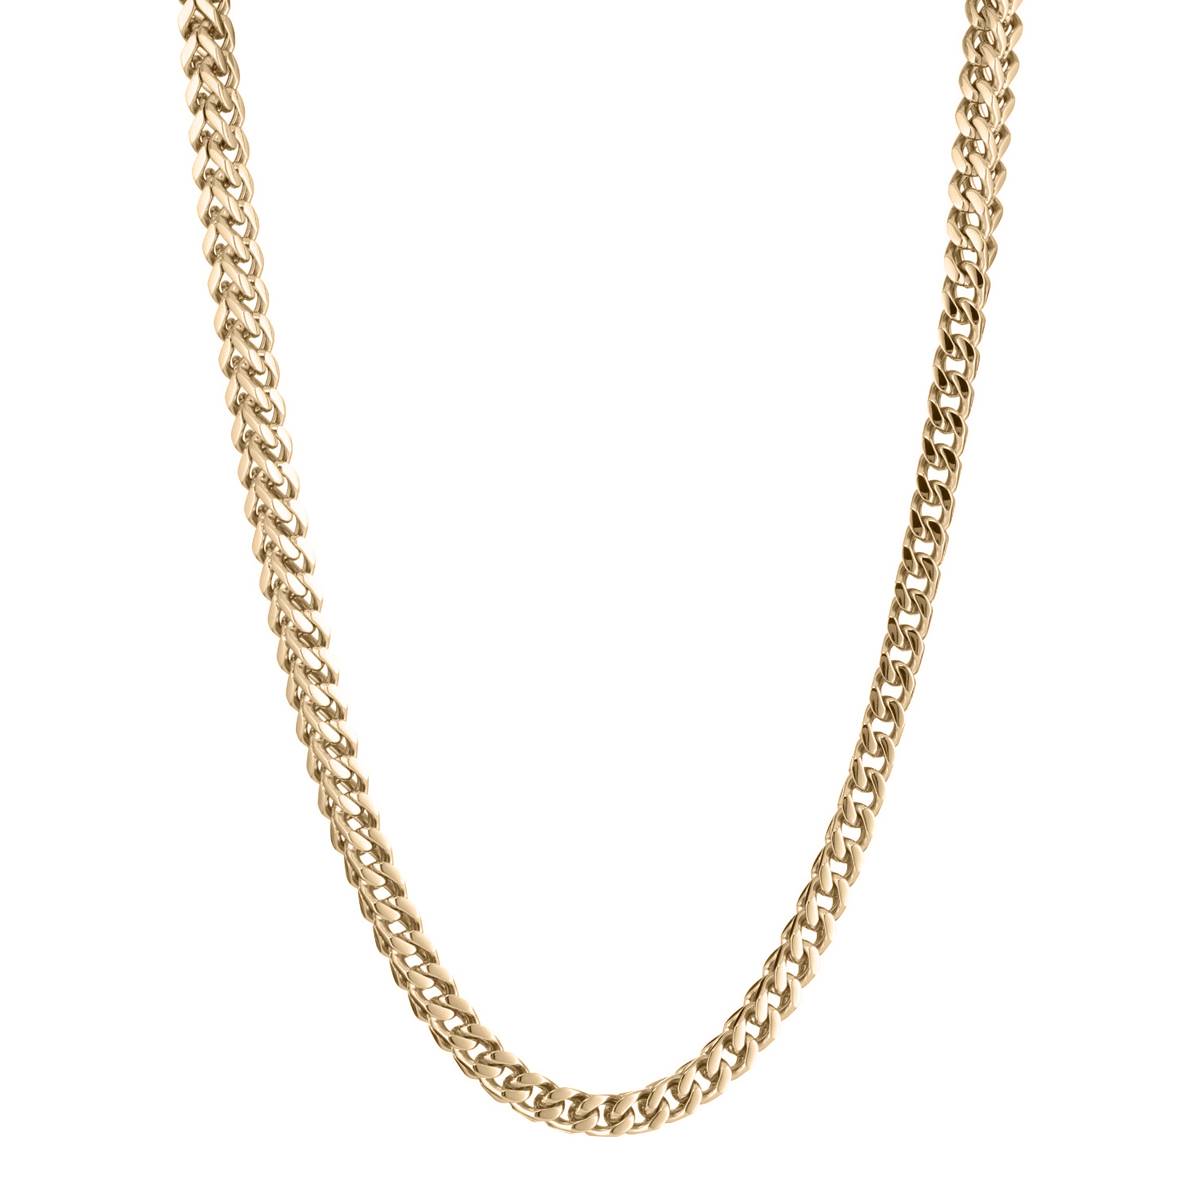 Mens Lynx Stainless Steel Thin Foxtail Chain Necklace